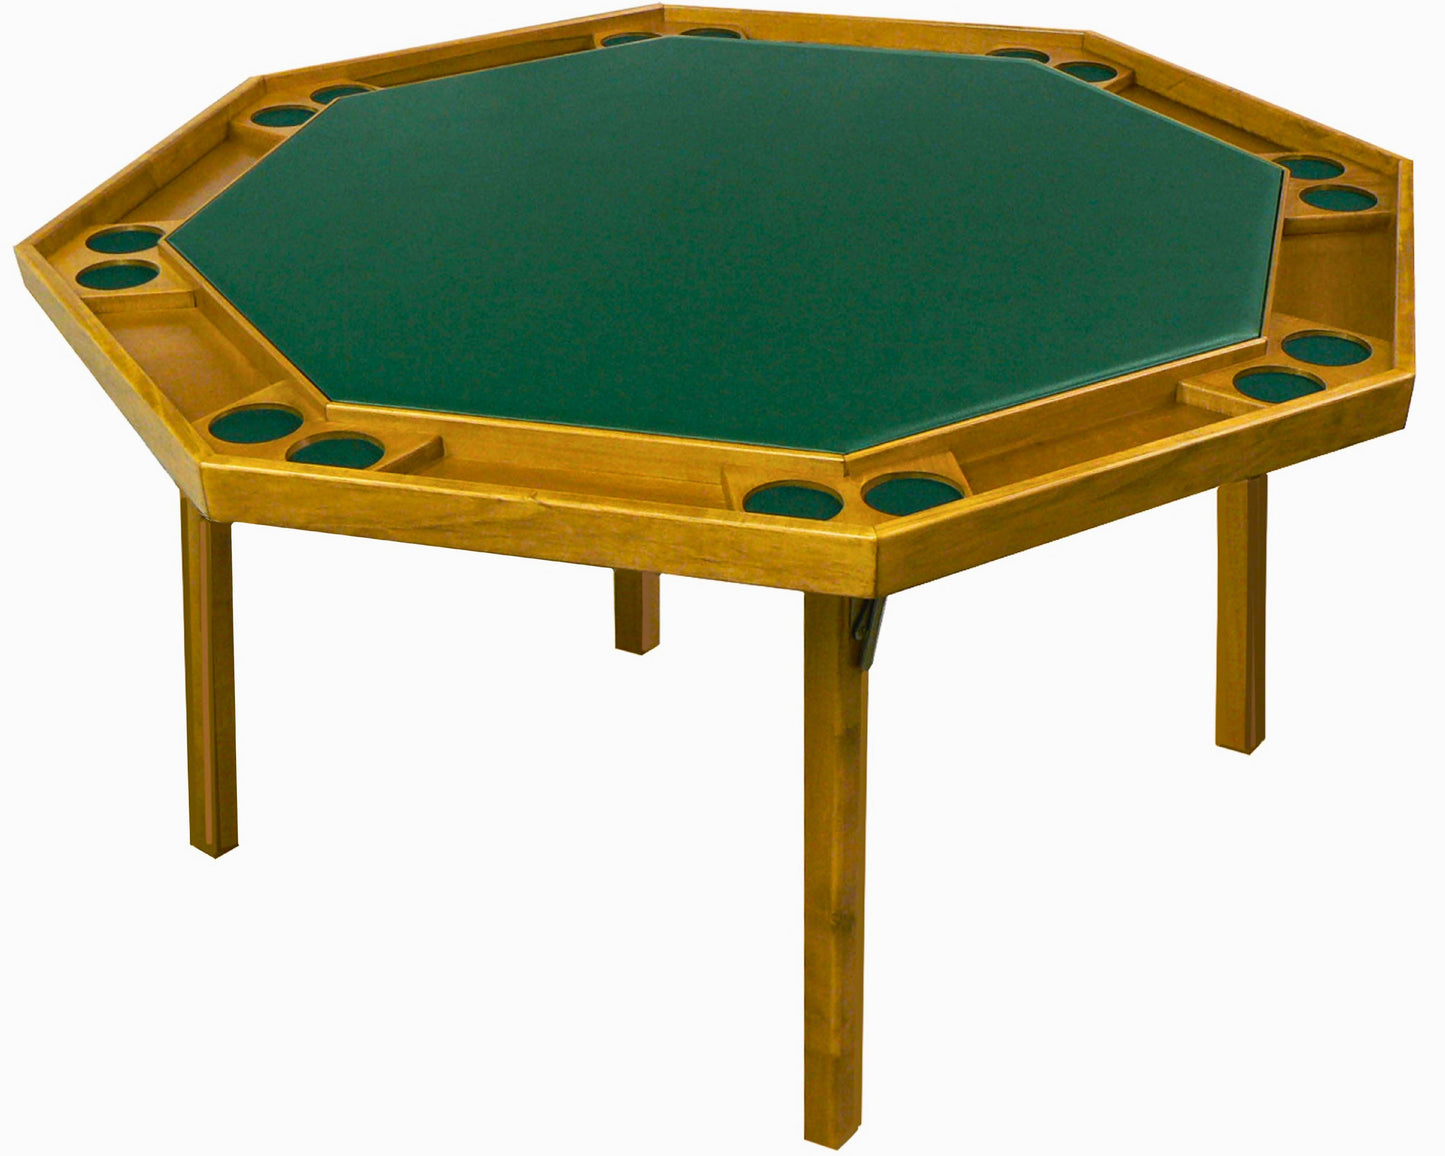 Kestell 85 57" 8-Player Folding Poker Table - Fabric Top-Game Table Genie